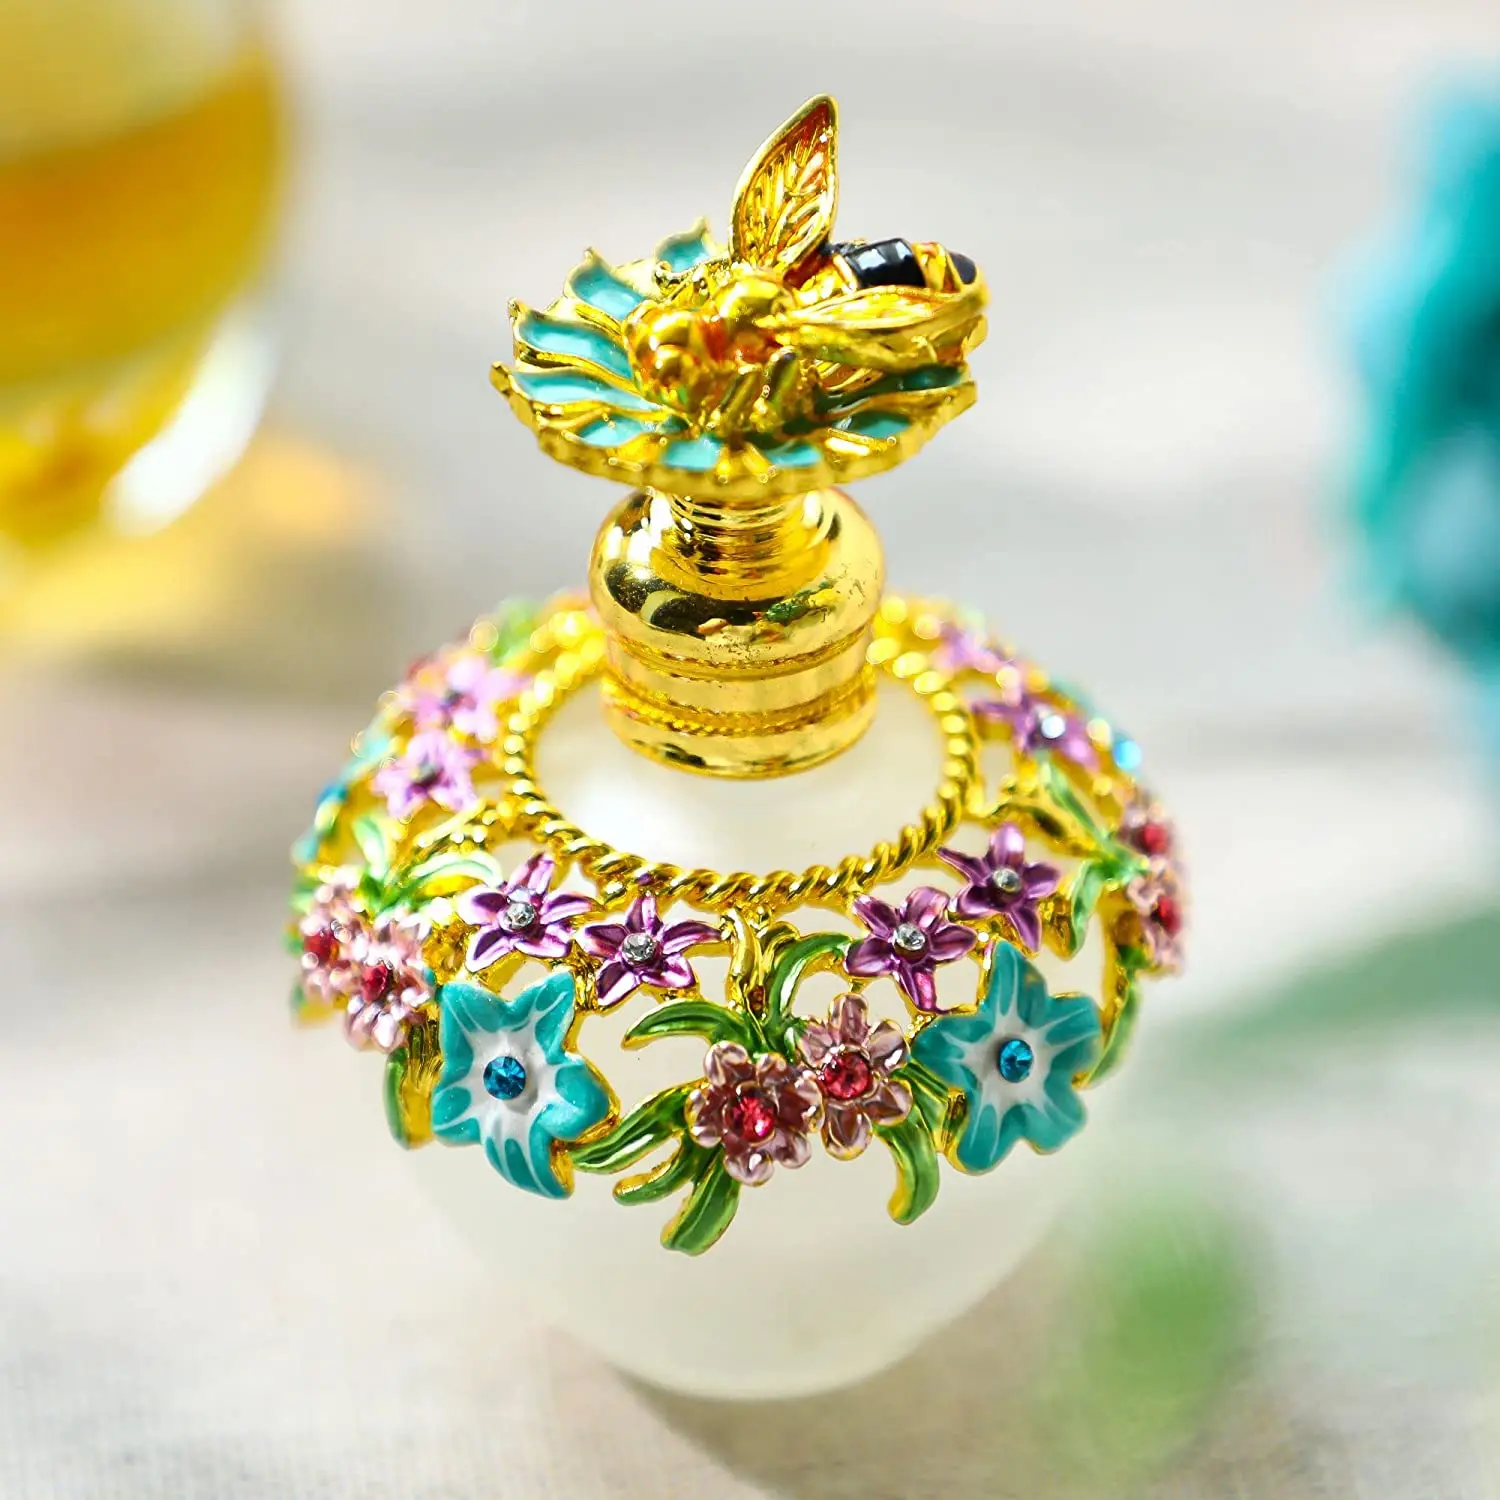 H&D Fancy Glass Perfume Bottle Empty with Flowers Bee Charm Decorative Vintage Crystal Perfume Decanter(Golden,40ML) waist belt engraved plate for cowboy cowgirl with charm vintage belt hot girl waist chain wide sexy oversize buckle